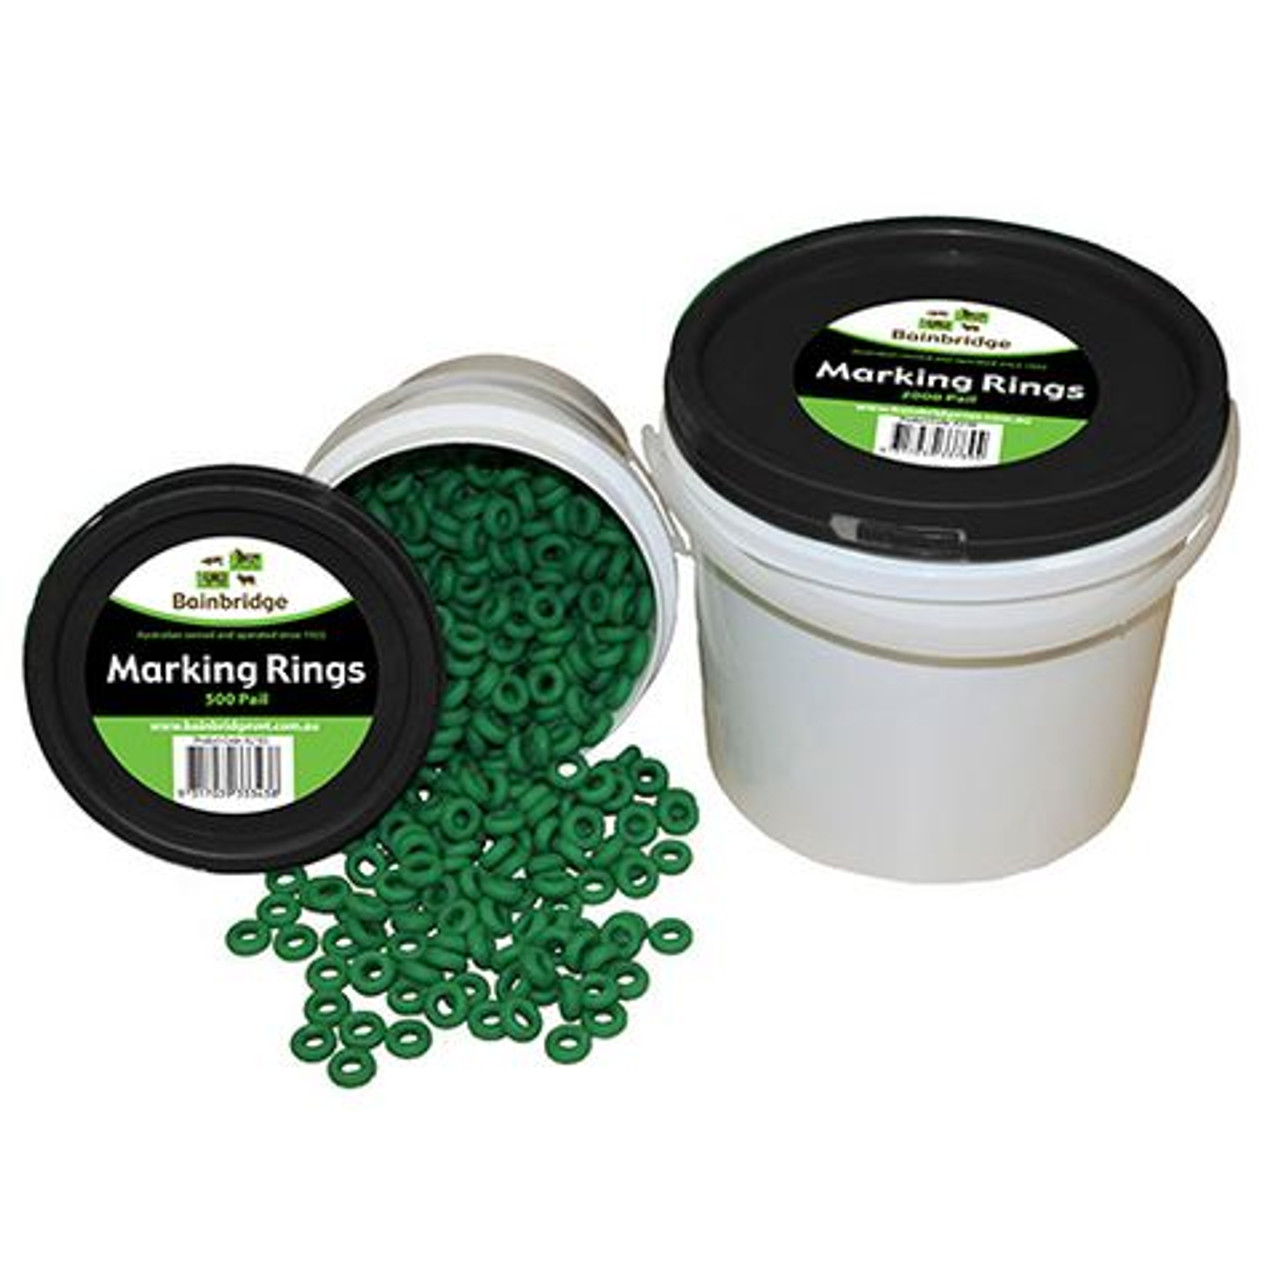 This photo is of 500 Pail, you are buying  

BAINBRIDGE 100 PK MARKING RINGS GREEN

• Excellent quality Bainbridge Marking Rings.
• Used for the marking of calves and lambs.